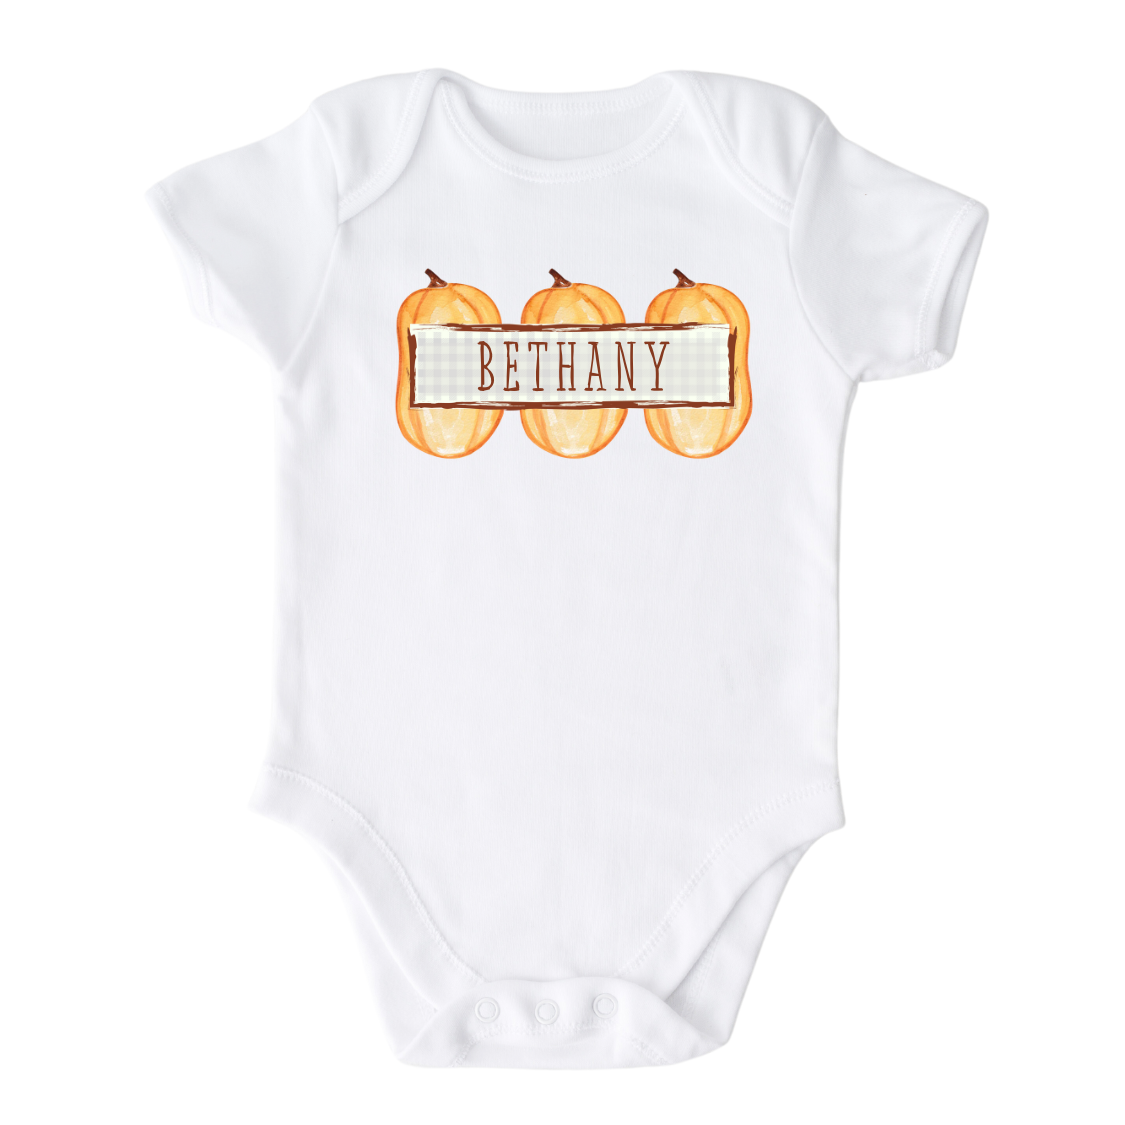 Baby Onesie - Fall Baby Clothes - Cute Baby Gift - Baby Bodysuit with a cute pumpkin frame design, customizable with names.